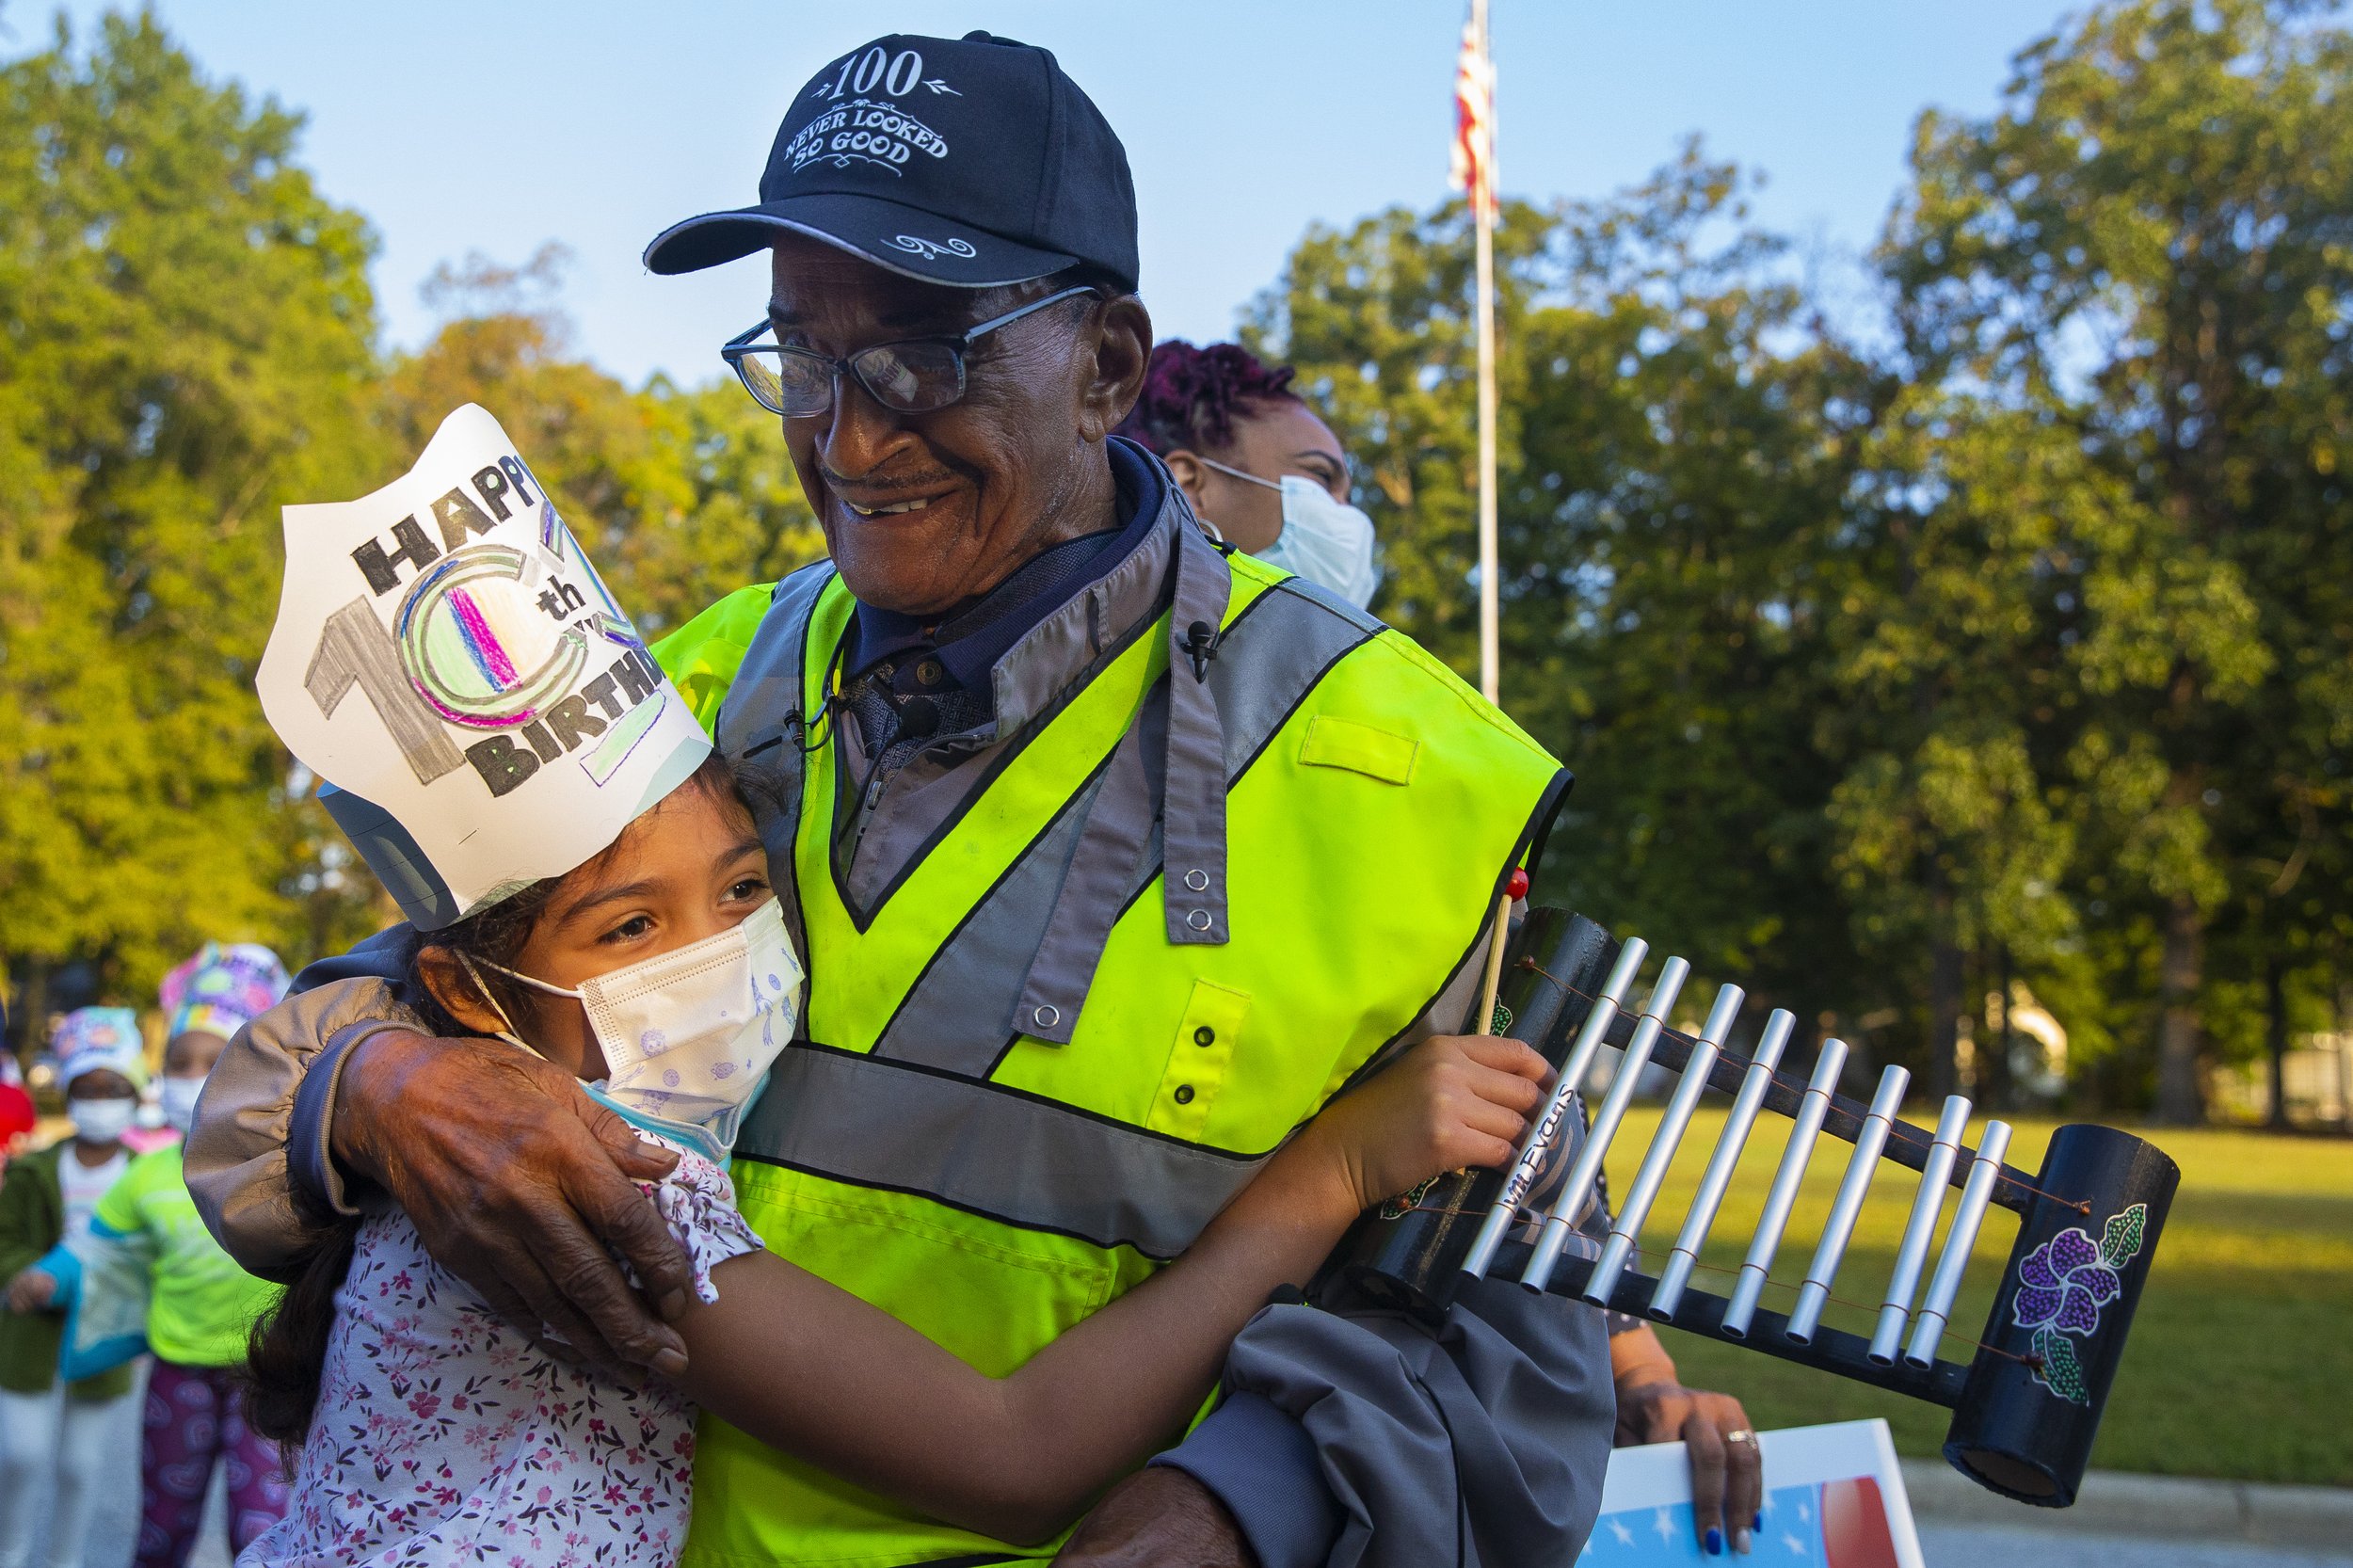  A Peck Elementary School student hugs Thomas Faucette, a crossing guard for Peck Elementary School, during a birthday celebration in honor of his 100th birthday at Peck Elementary School in Greensboro, N.C., on Wednesday, September 29, 2021.     